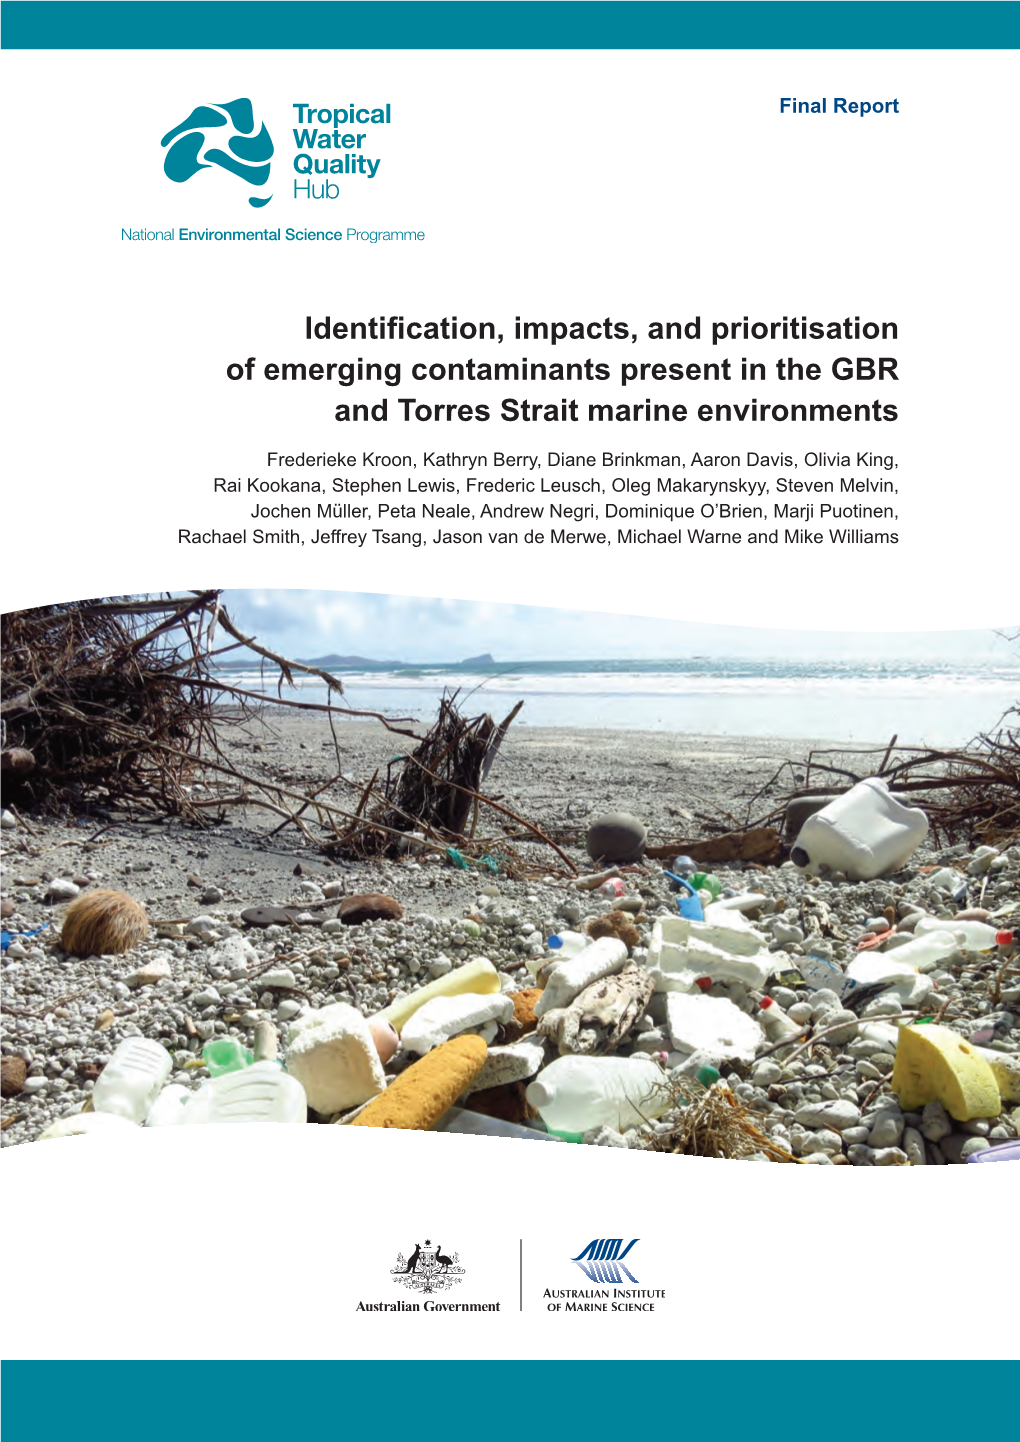 Identification, Impacts, and Prioritisation of Emerging Contaminants Present in the GBR and Torres Strait Marine Environments